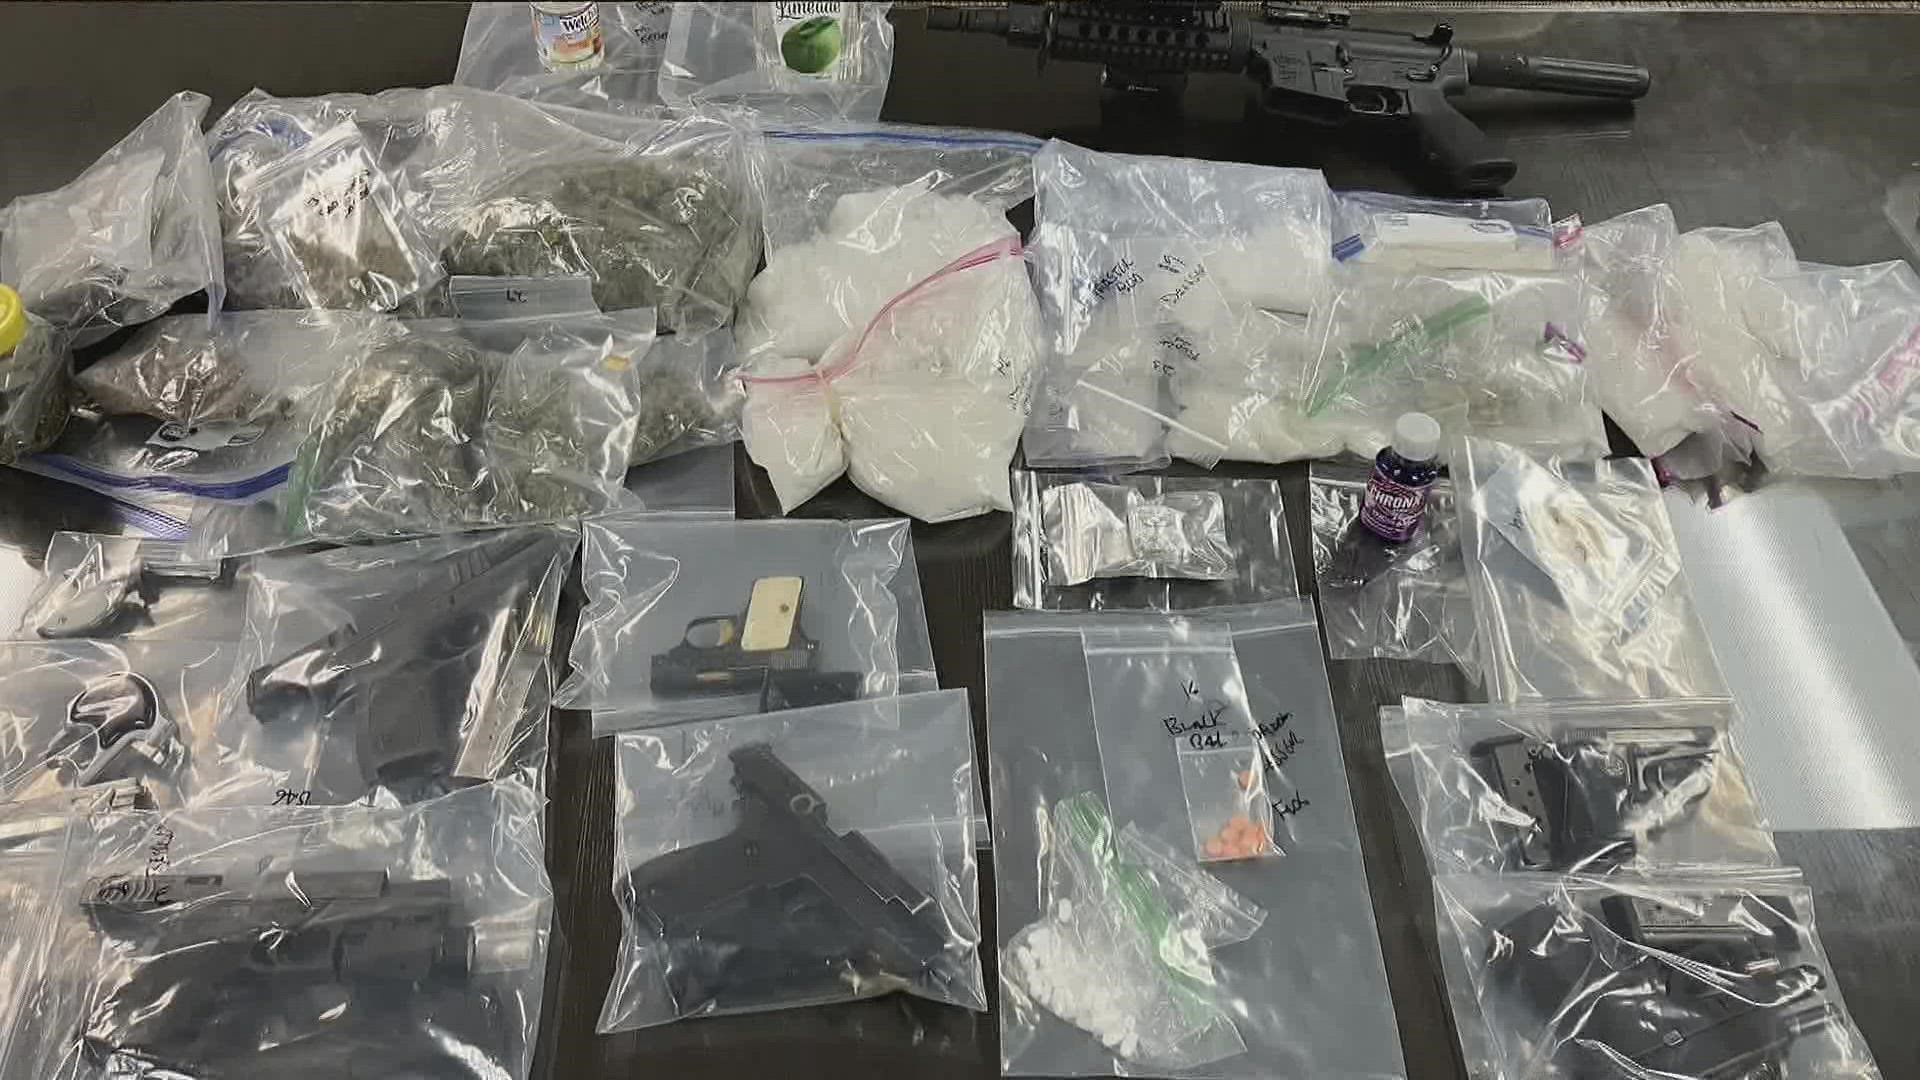 Authorities worked in hand with the GBI in a bust that confiscated a total of 10.9 pounds of meth, 21 guns, roughly 250 prescription pills and more.